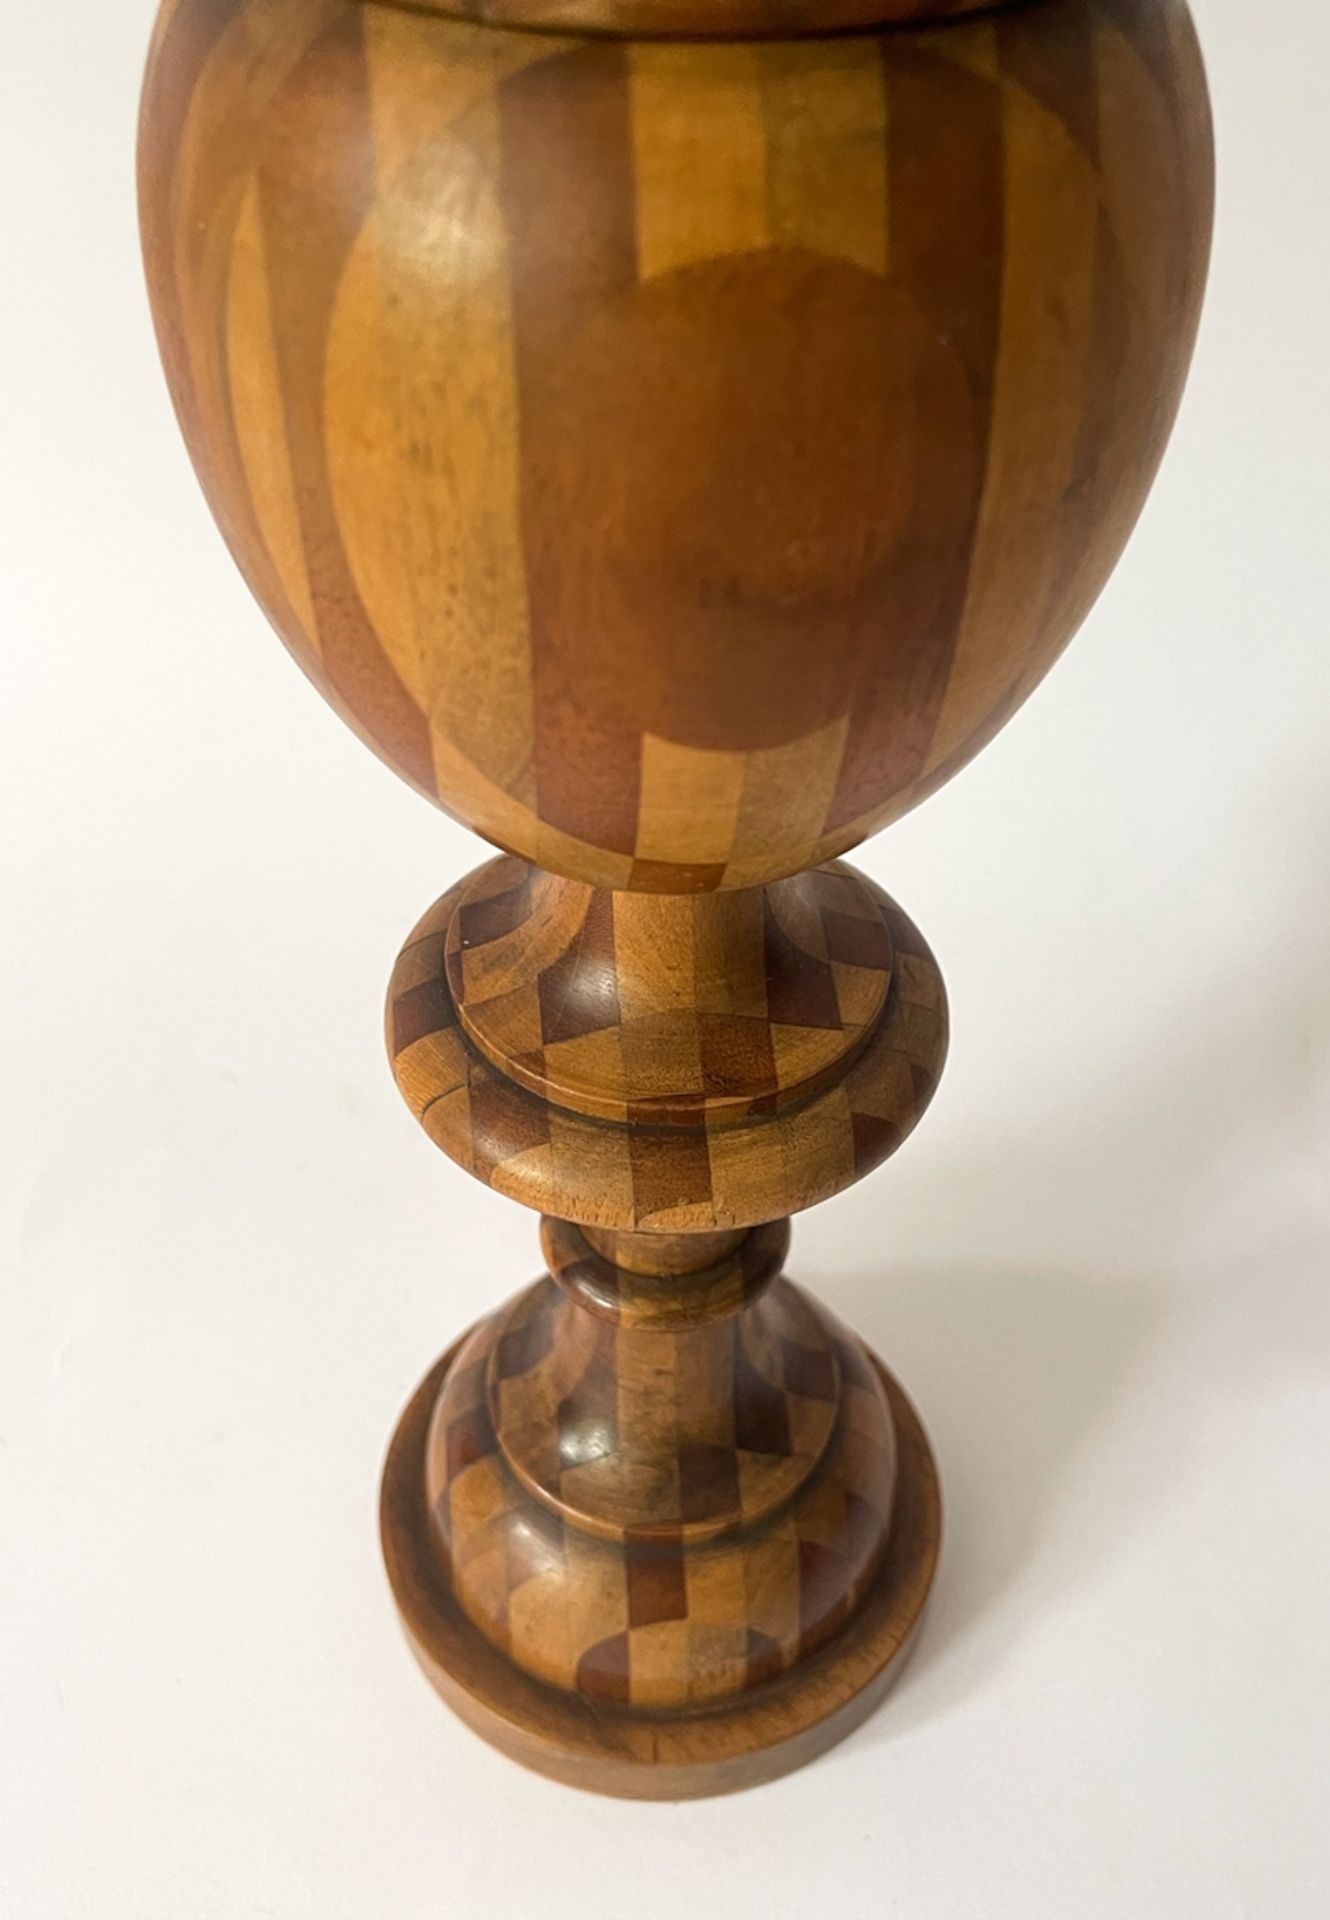 Masterpiece wooden goblet with lid - Image 4 of 6